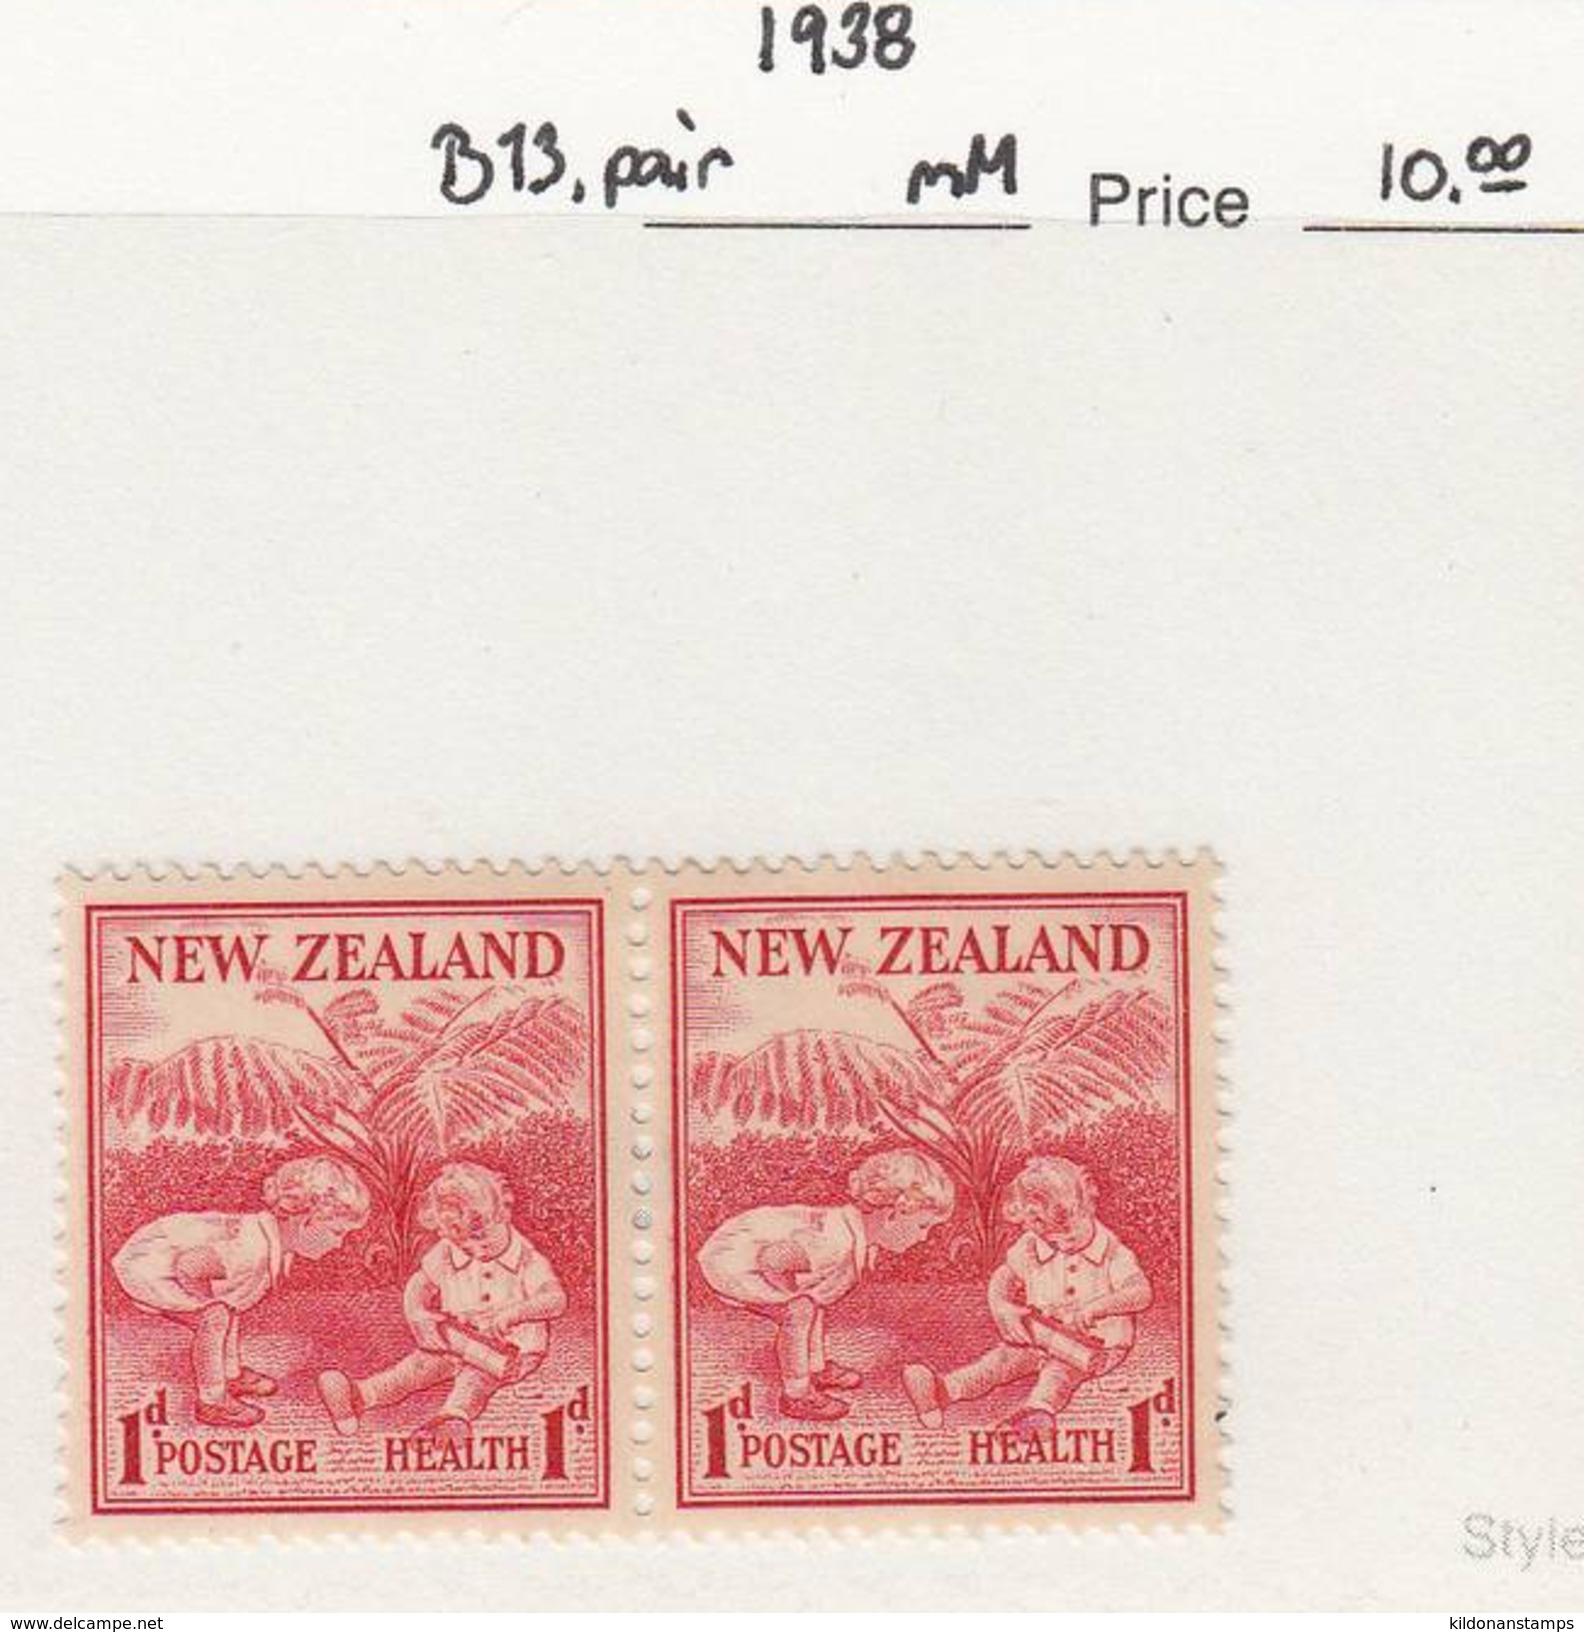 New Zealand 1938 Health, Mint Mounted, Pair, Sc# B13 - Unused Stamps